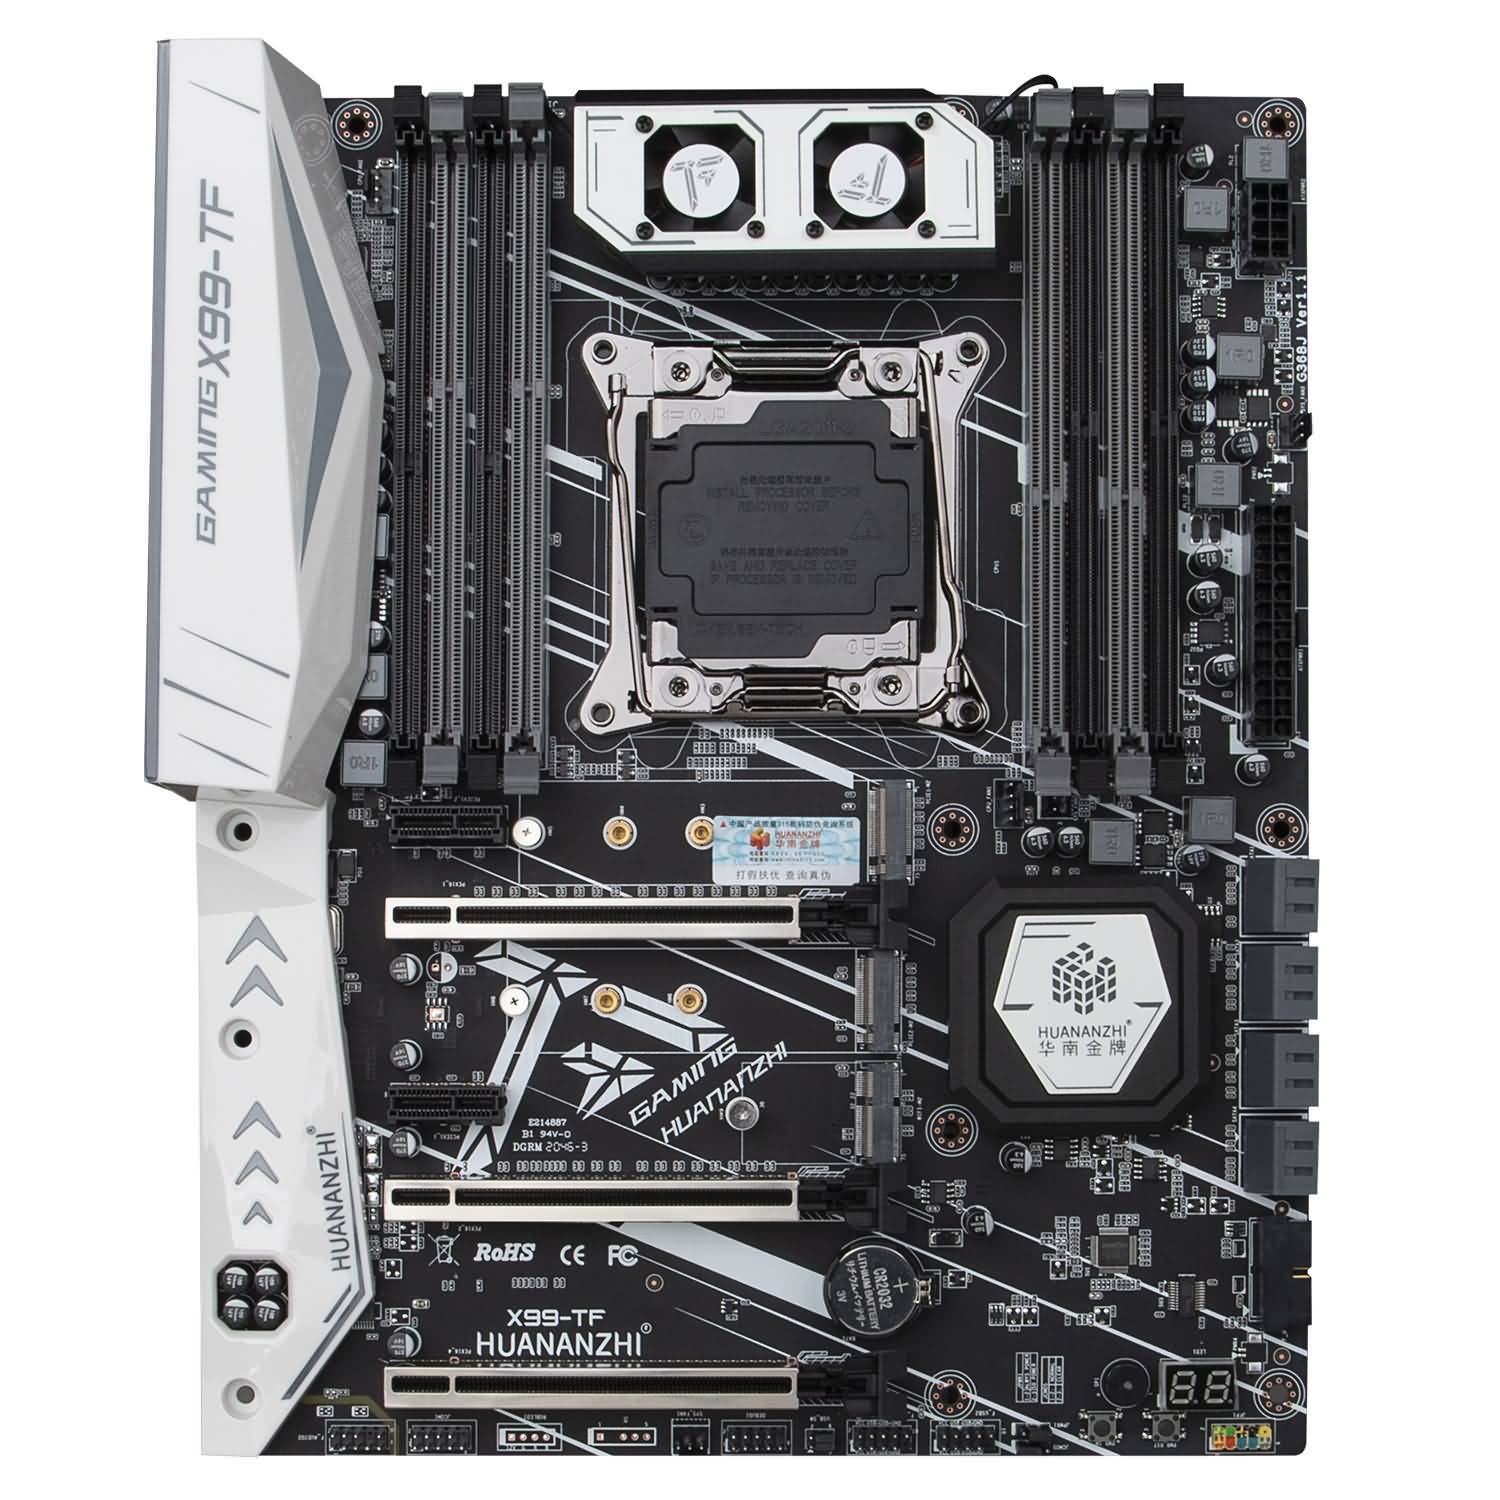 Download Huananzhi X99-TF Motherboard Free